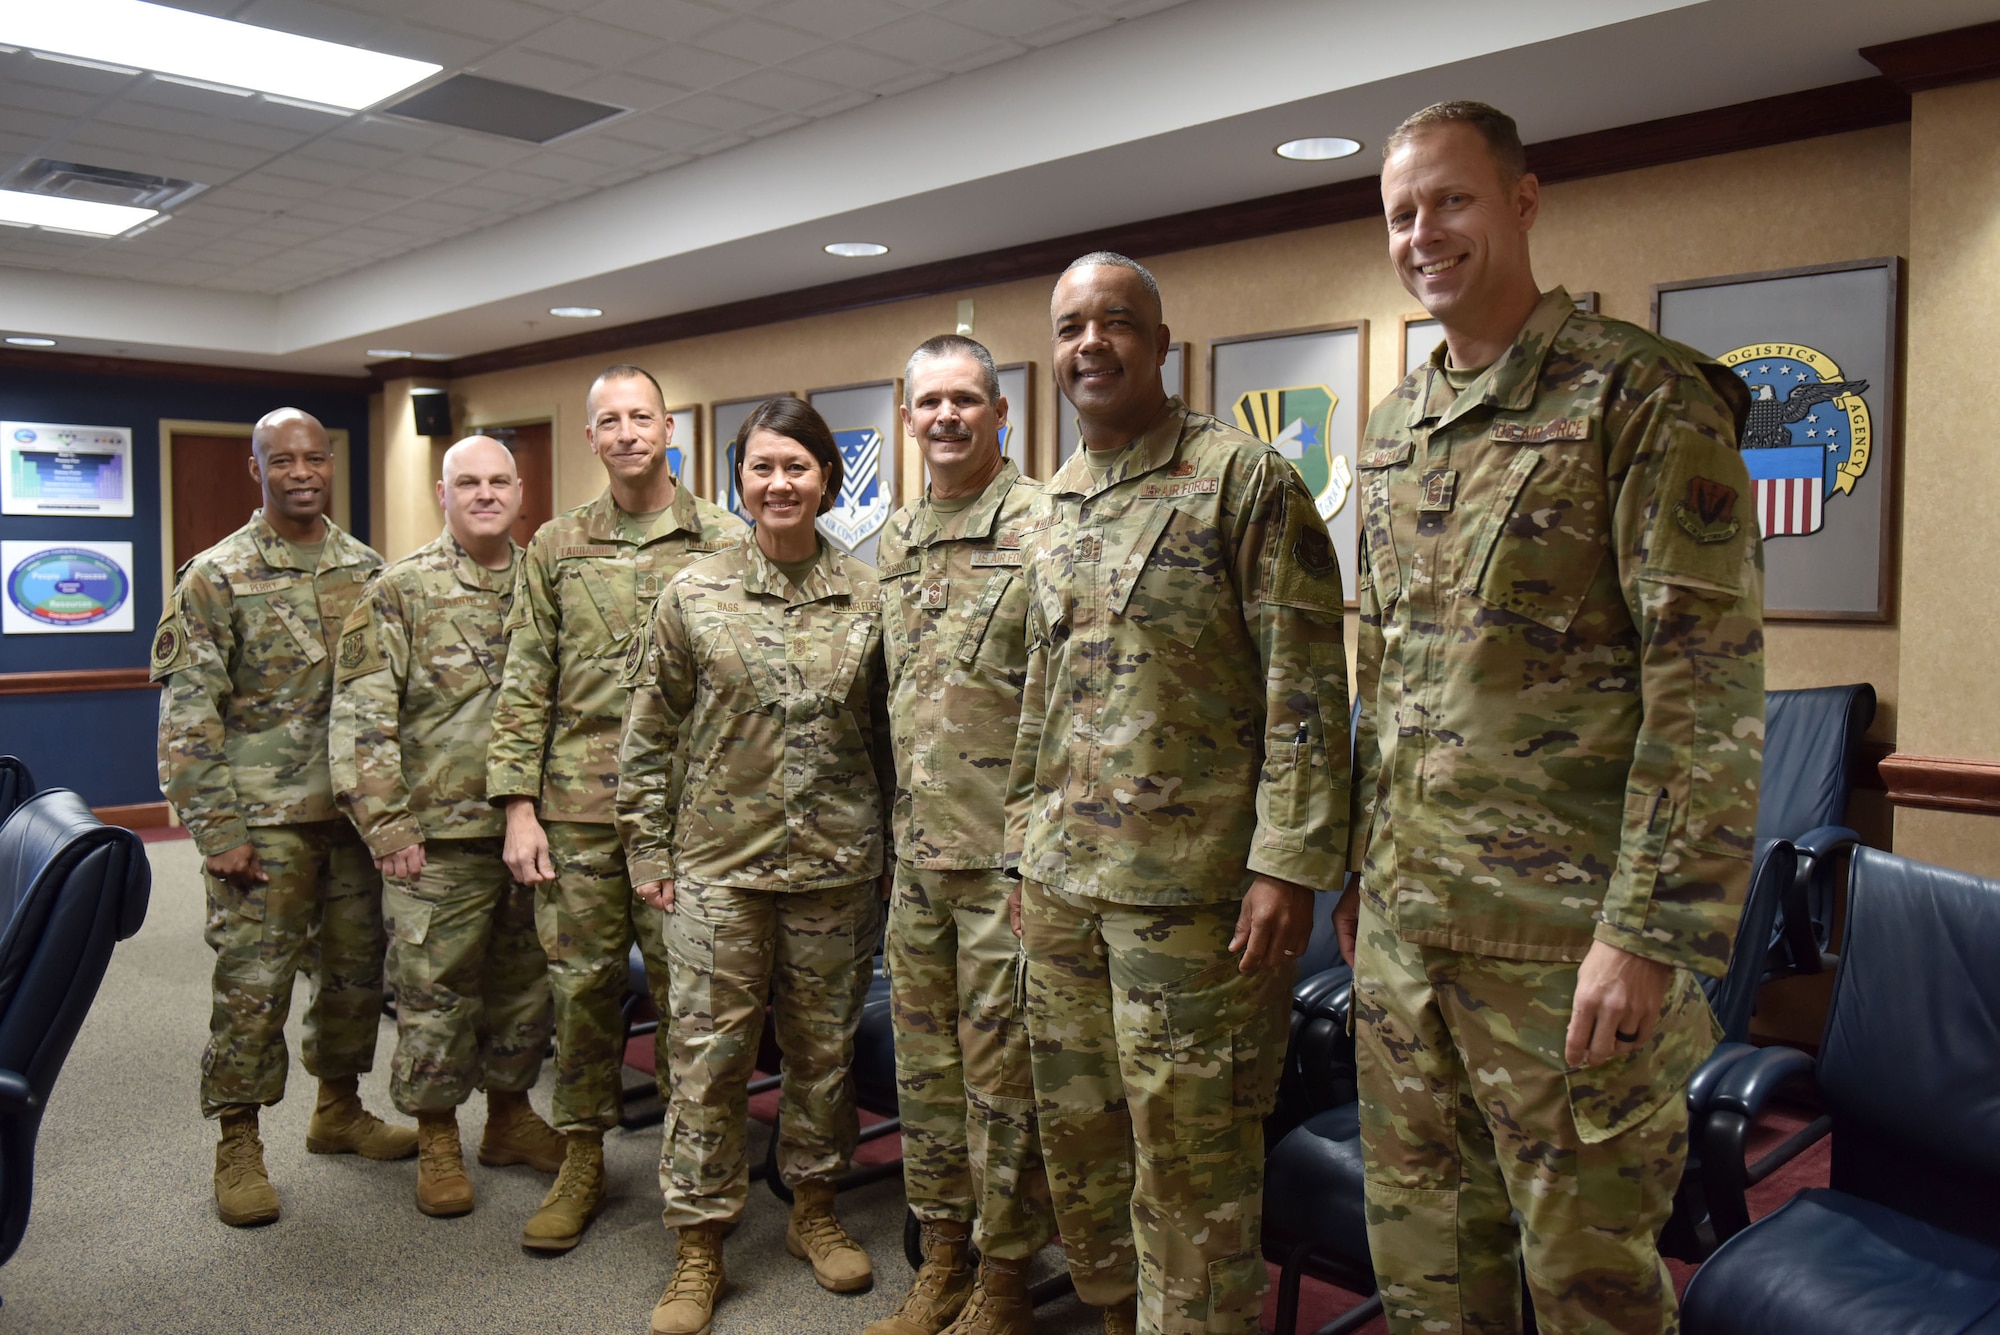 Airmen standing in conference room in a line posing for picture.